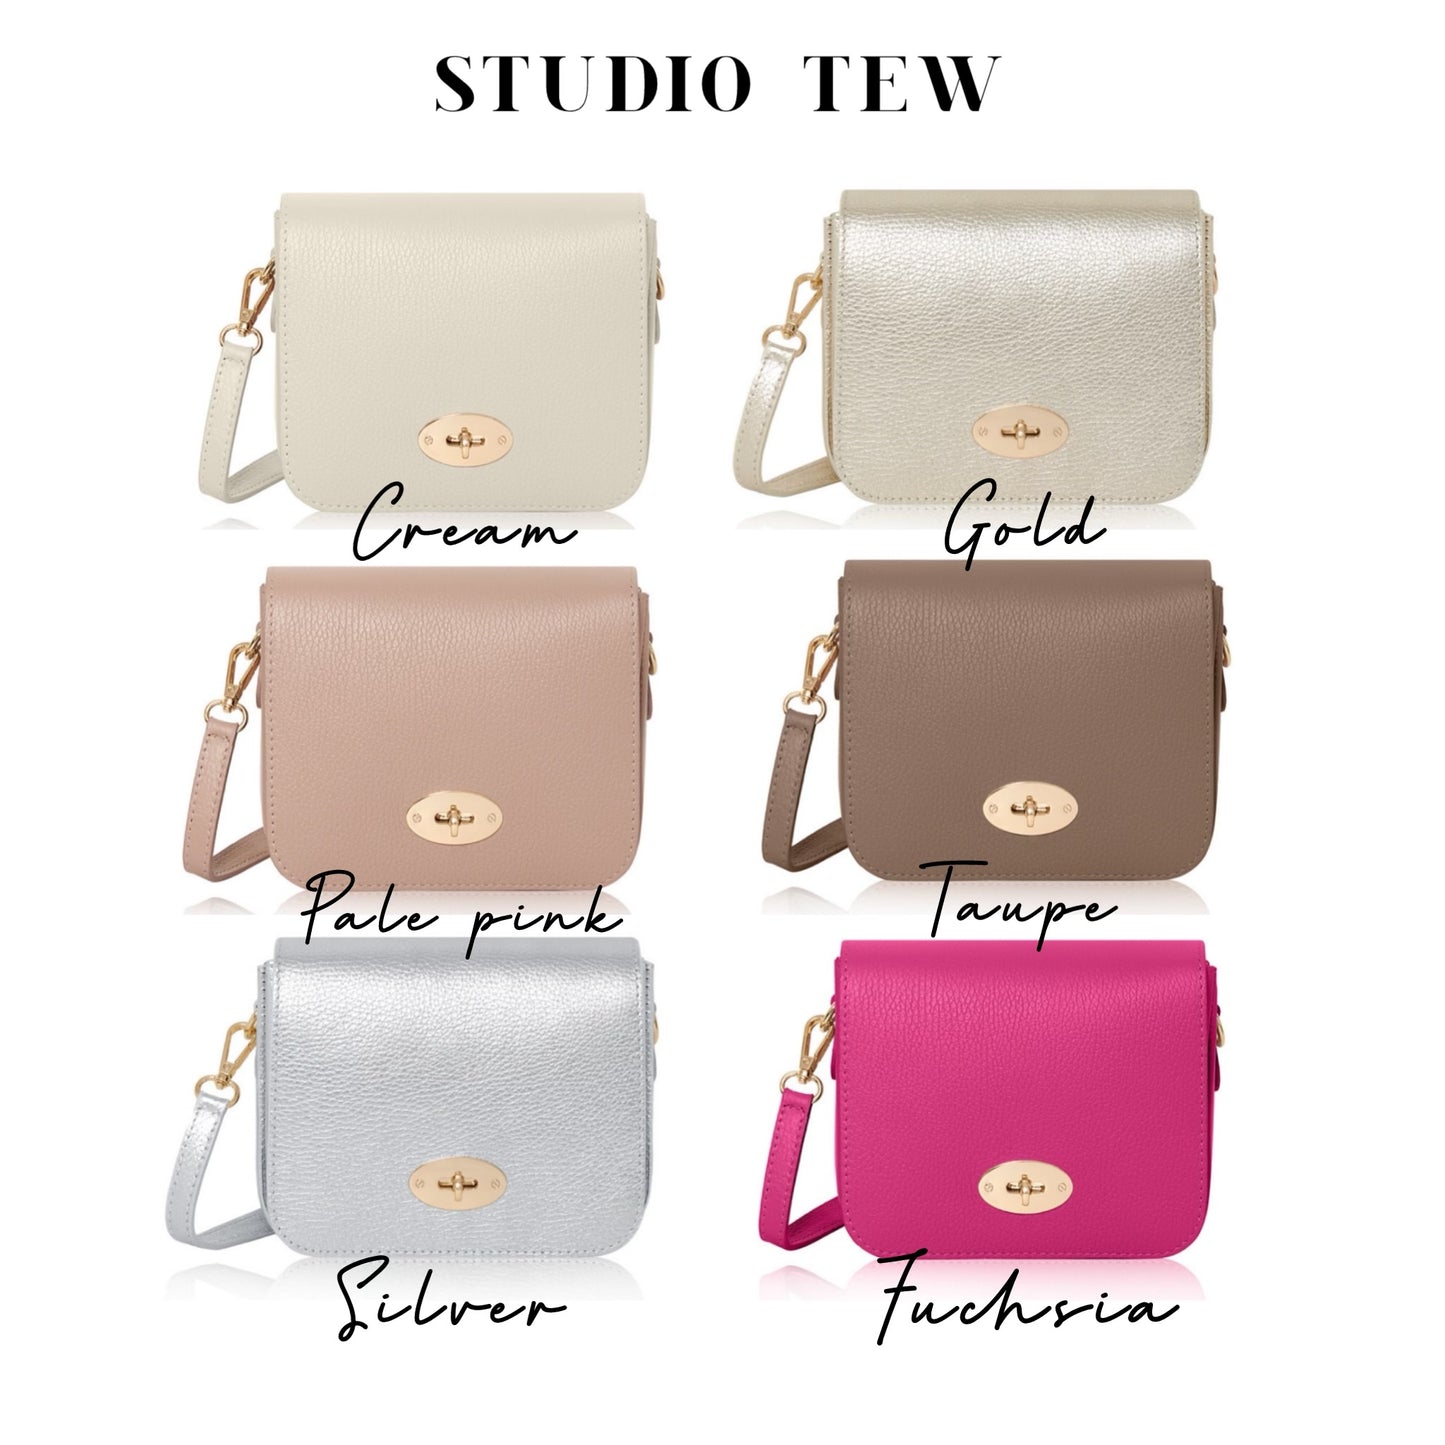 The Cilia Bag - Available in numerous colours.